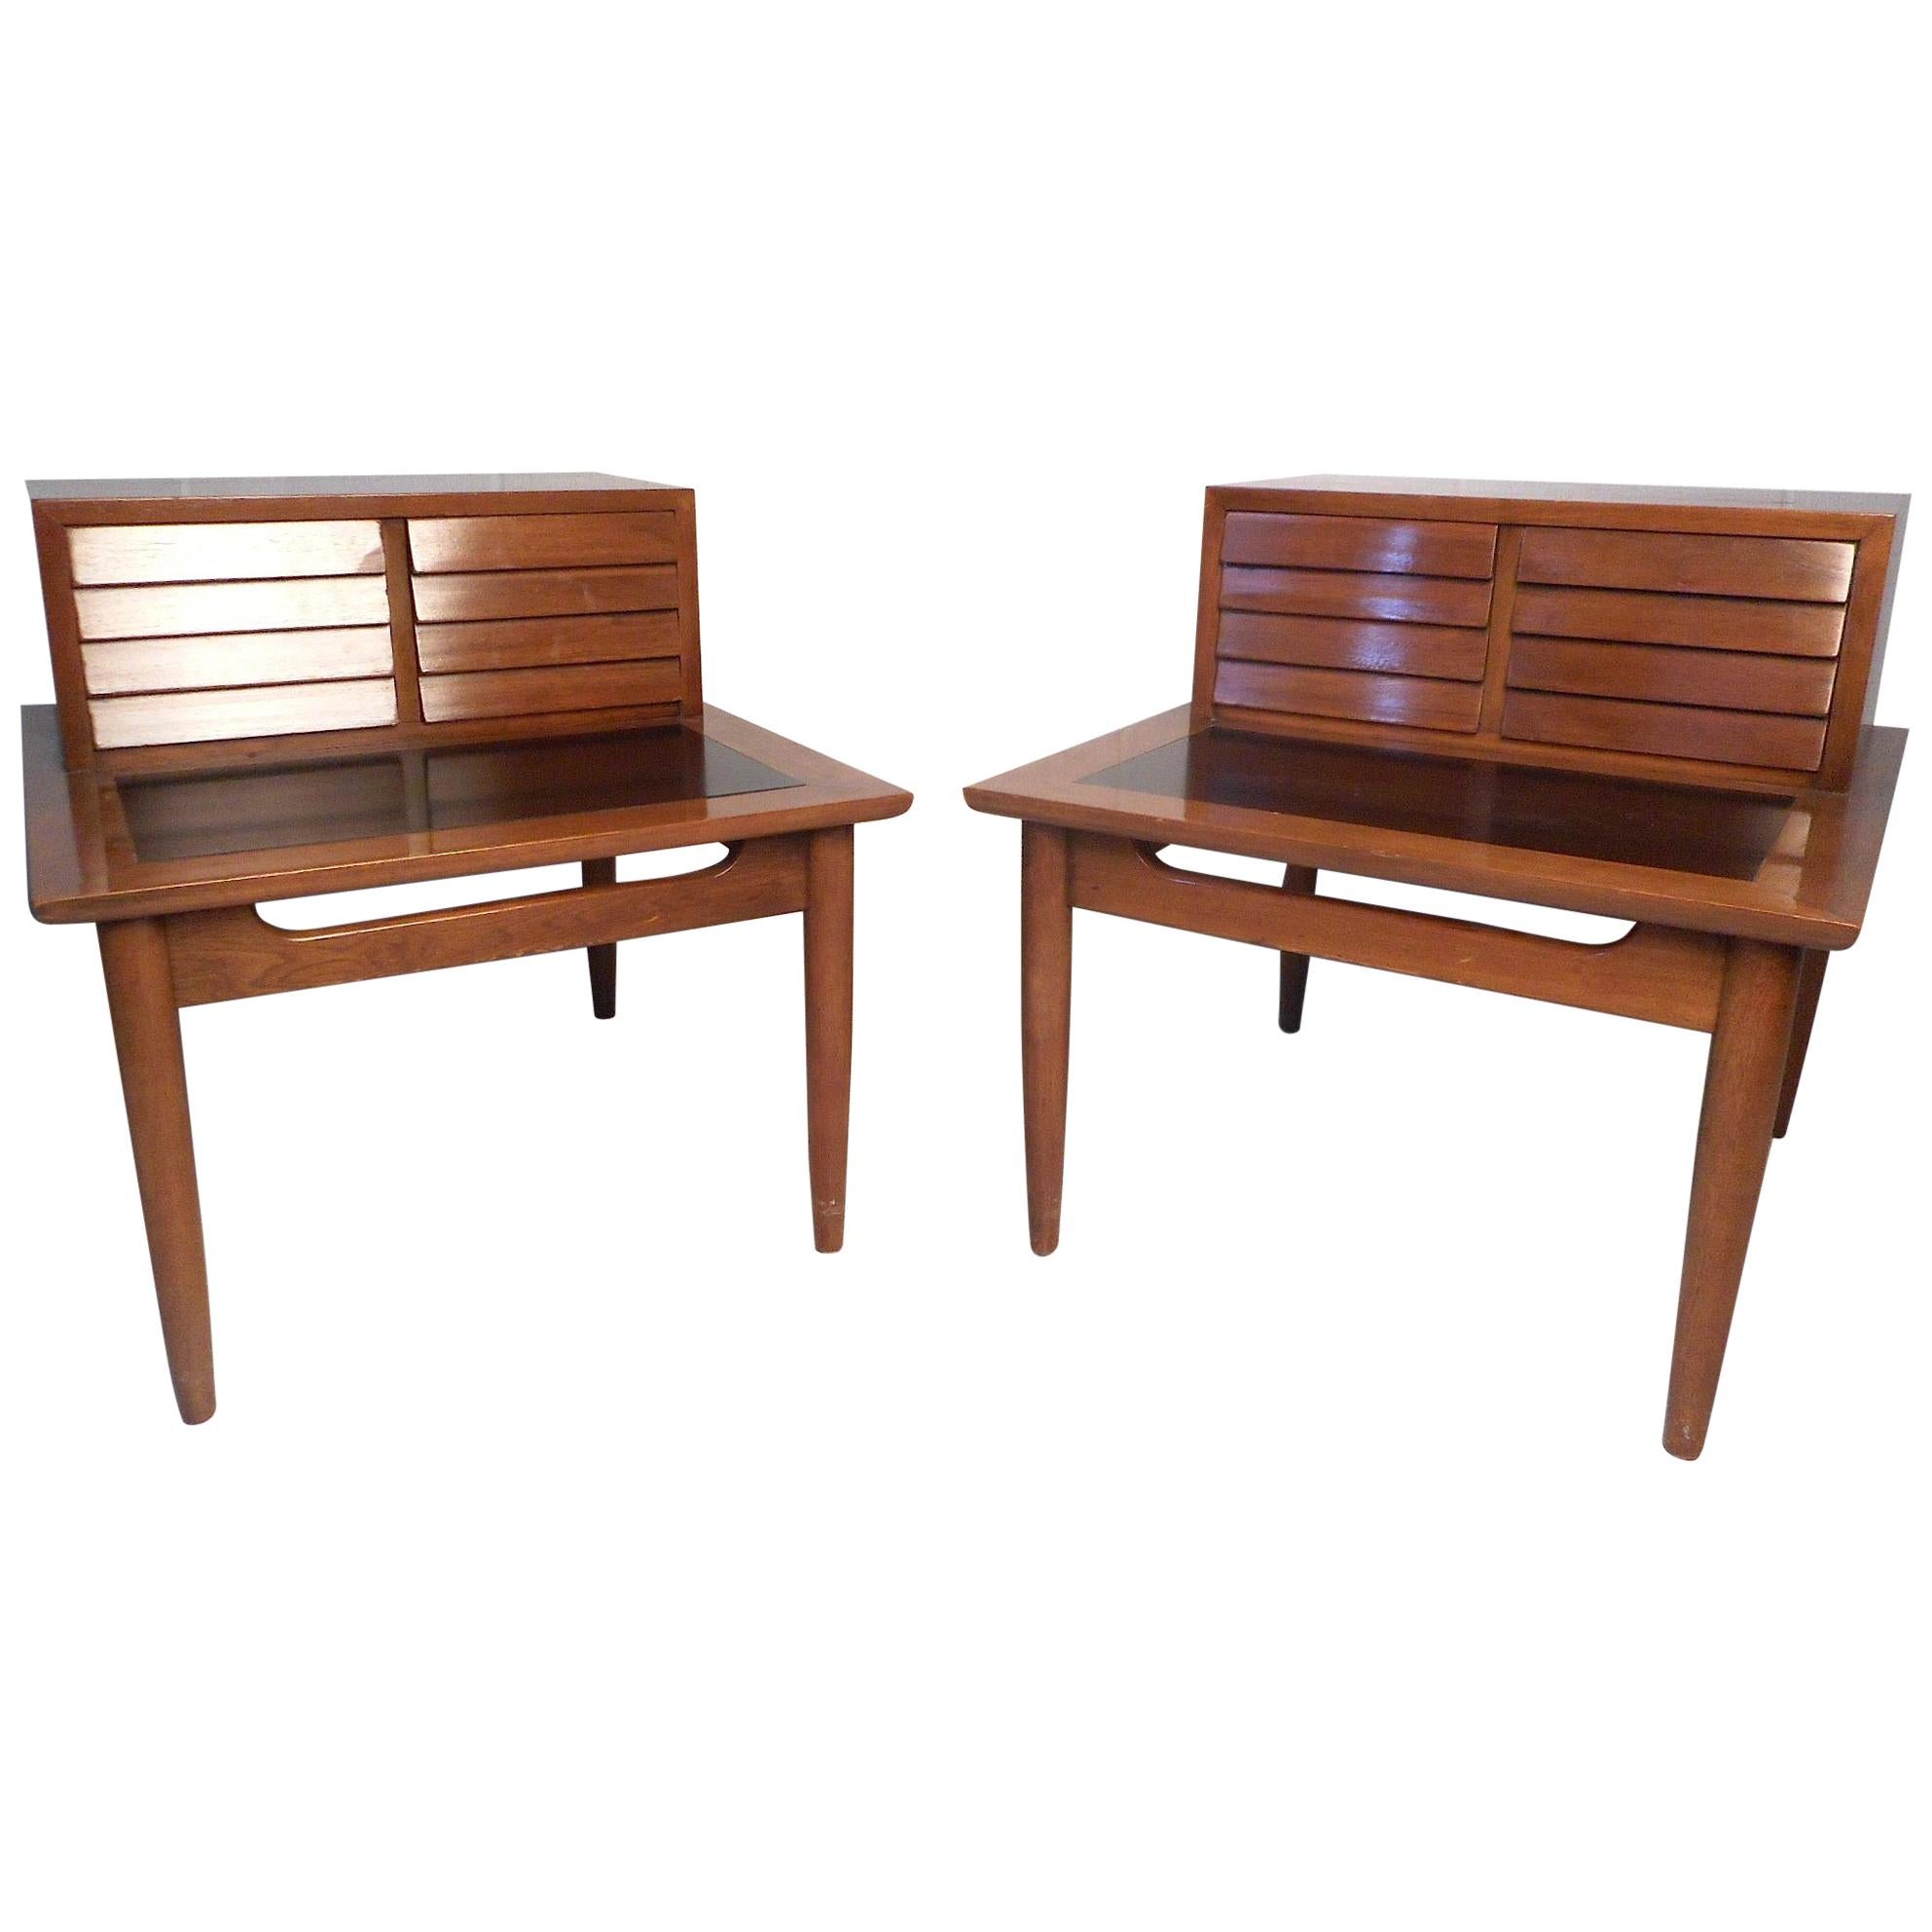 Pair of Mid-Century Modern Nightstands by American of Martinsville